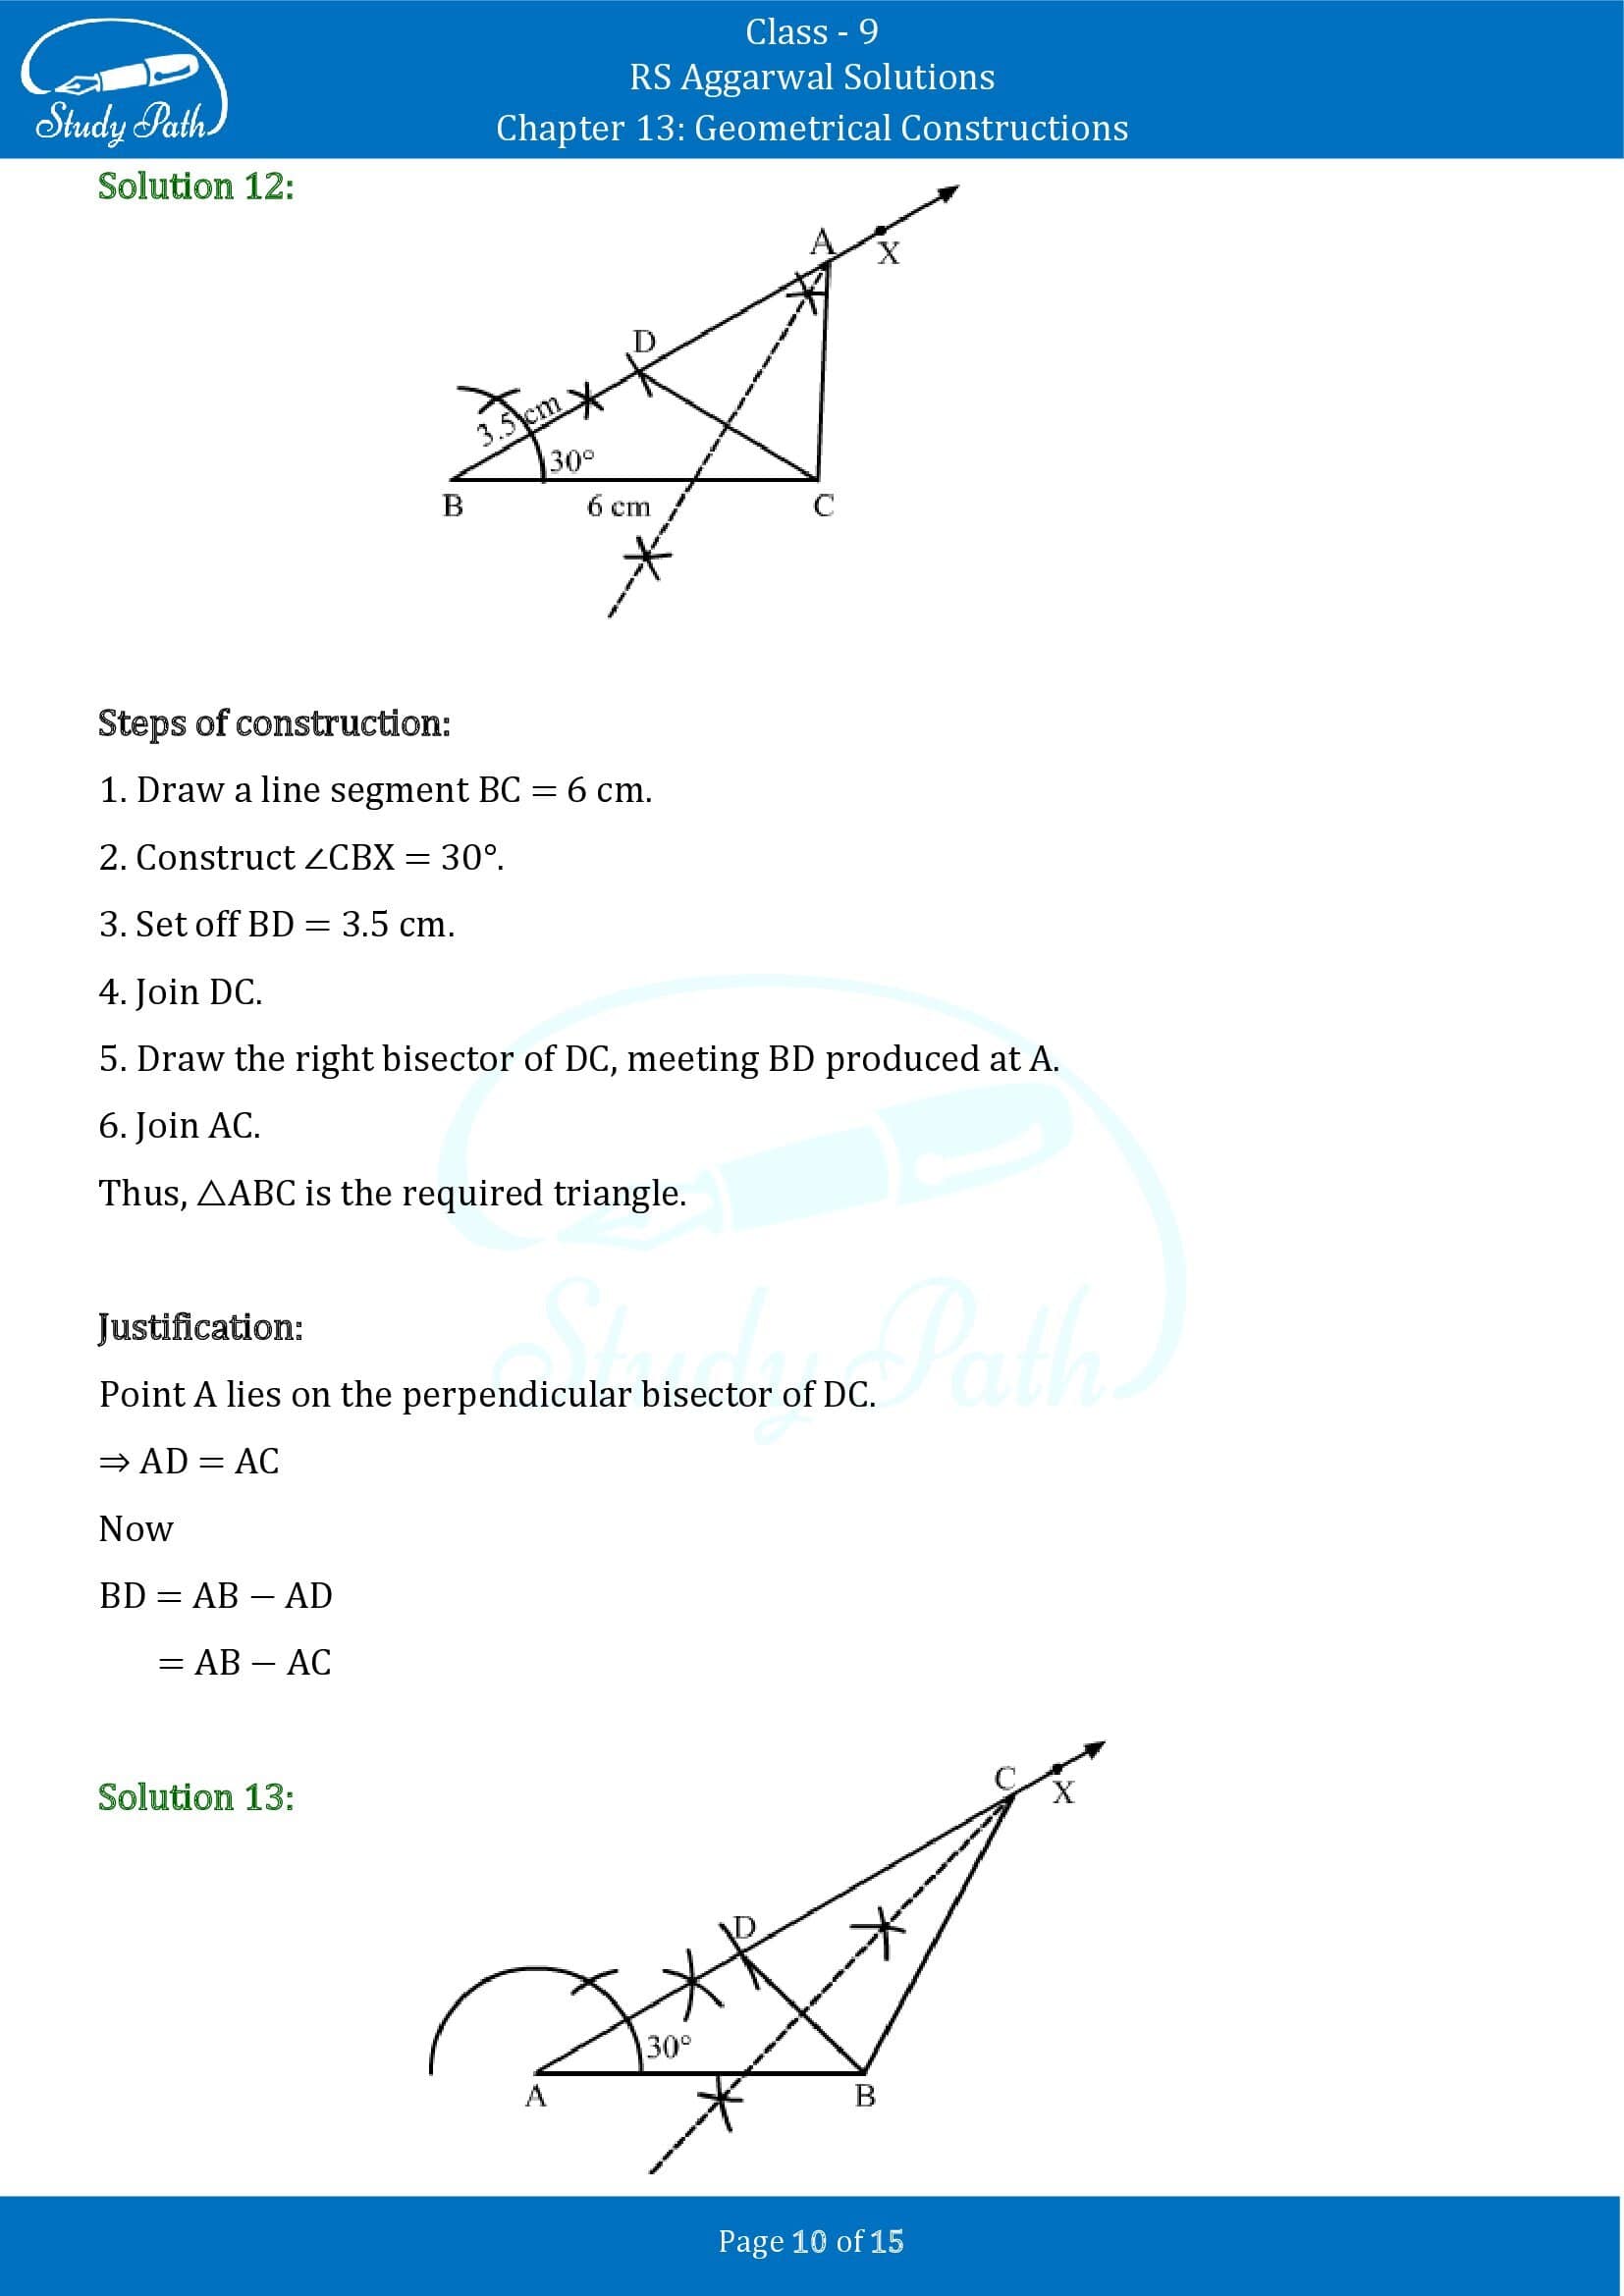 RS Aggarwal Solutions Class 9 Chapter 13 Geometrical Constructions 10